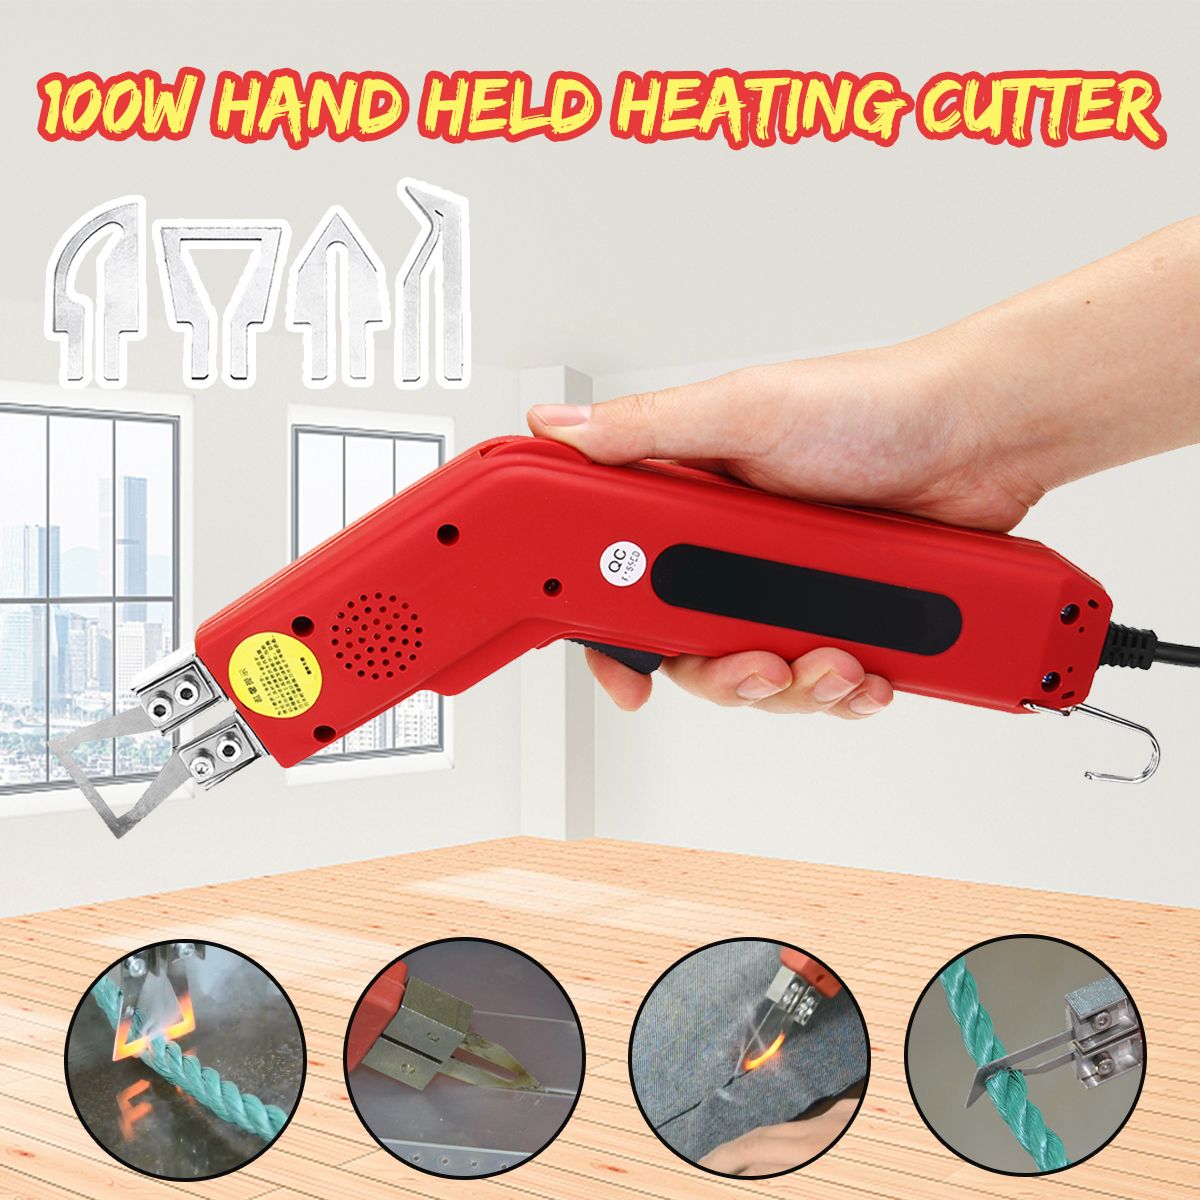 100W-Handheld-Hot-Heating-Cutter-Electric-Hot-Cutter-Foam-Cutter-Heat-Sealer-For-Cloth-Cable-Wire-Ro-1453046